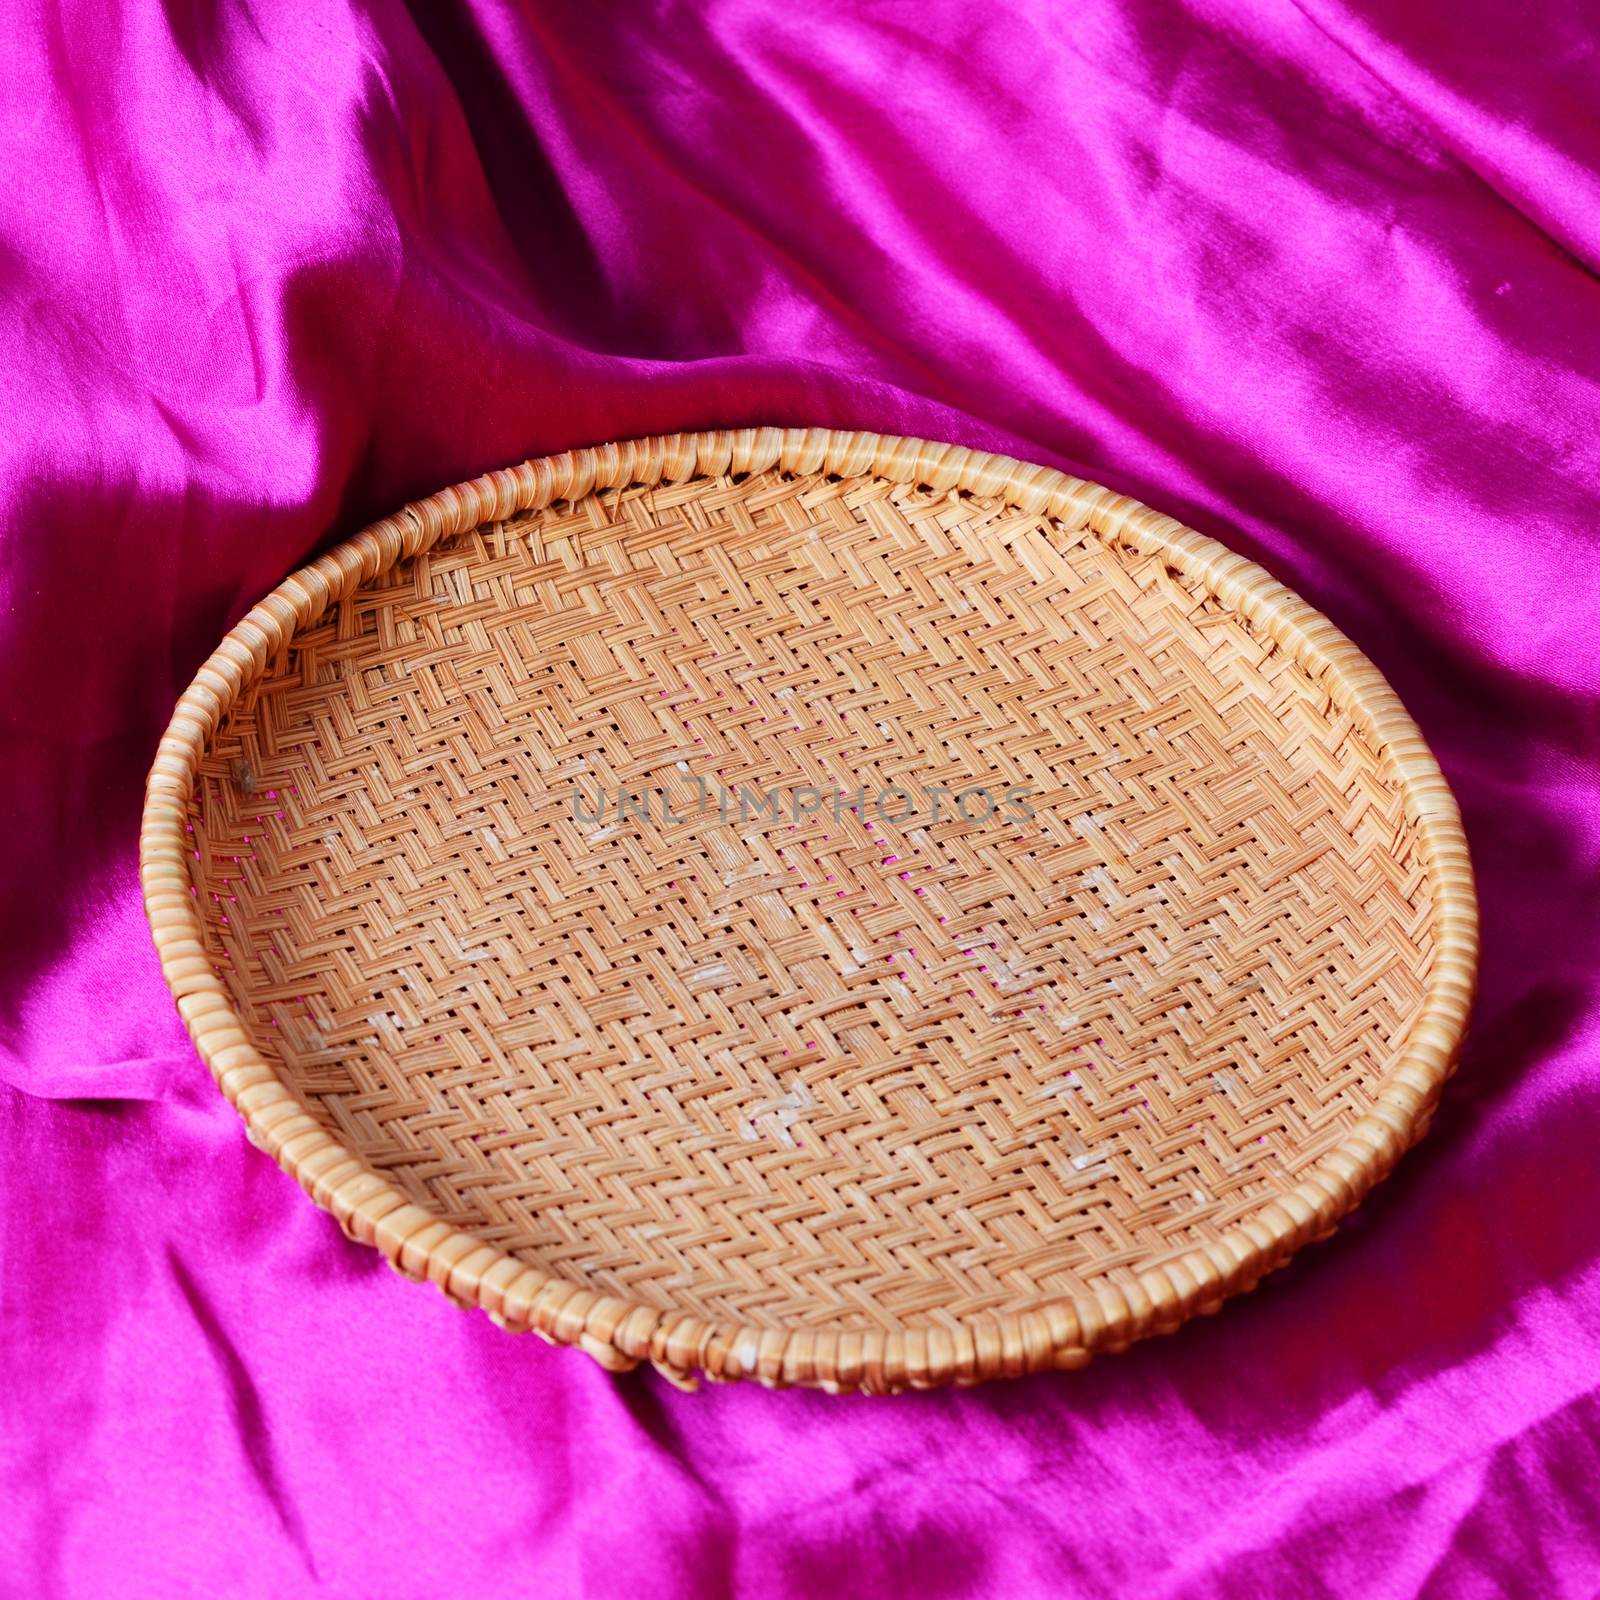 empty basket on the pink satin by sarkao